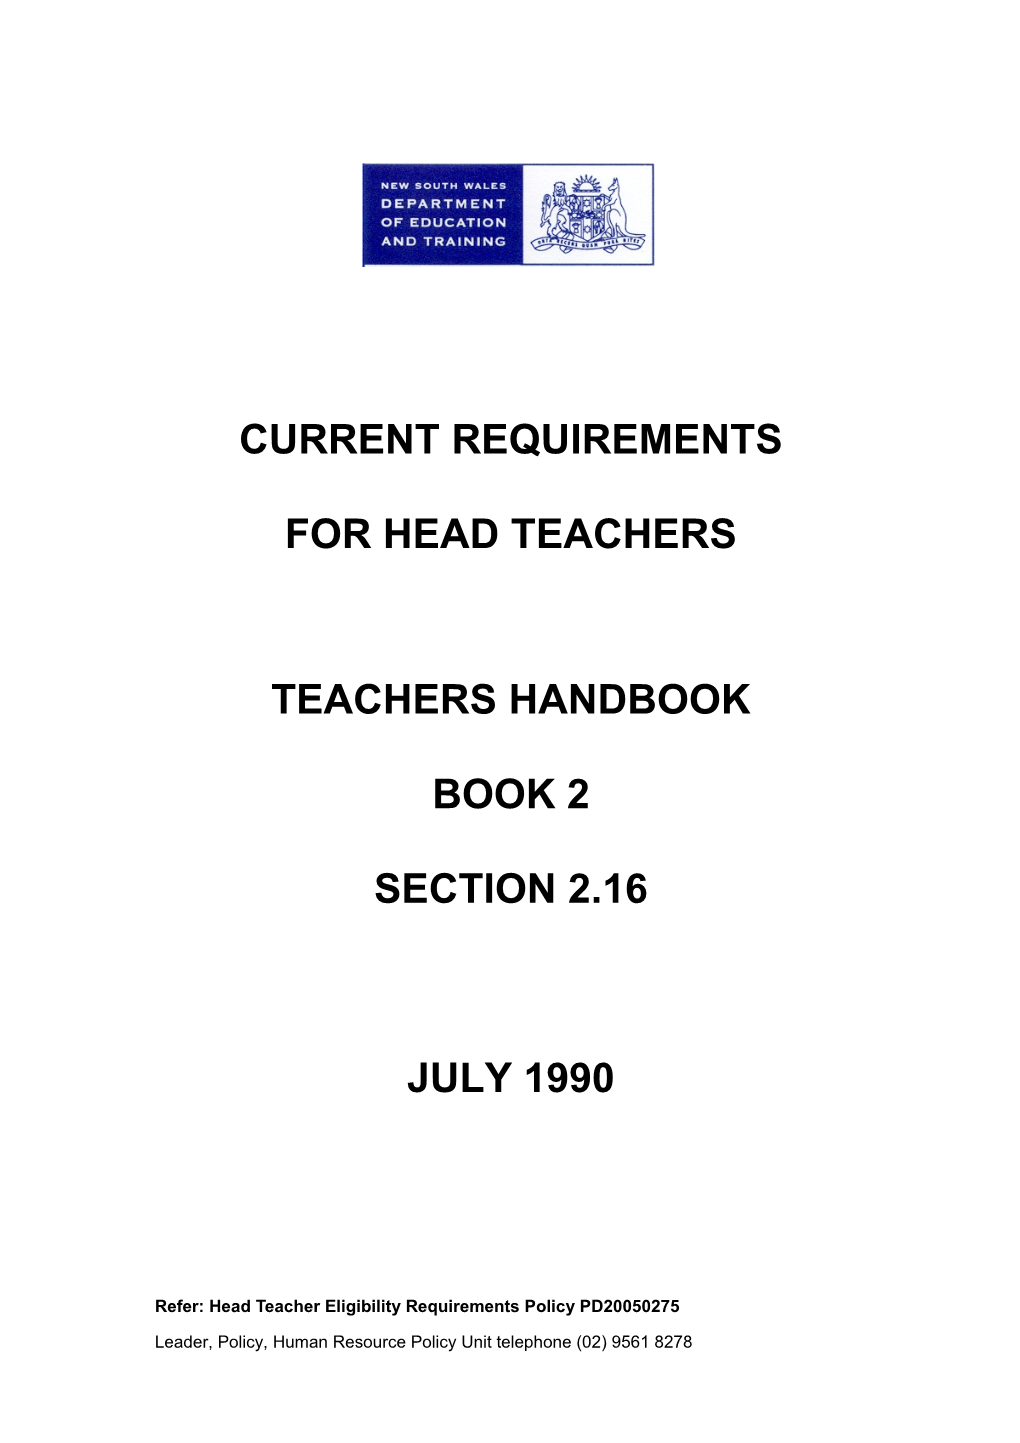 Current Requirements for Head Teachersjuly 1990